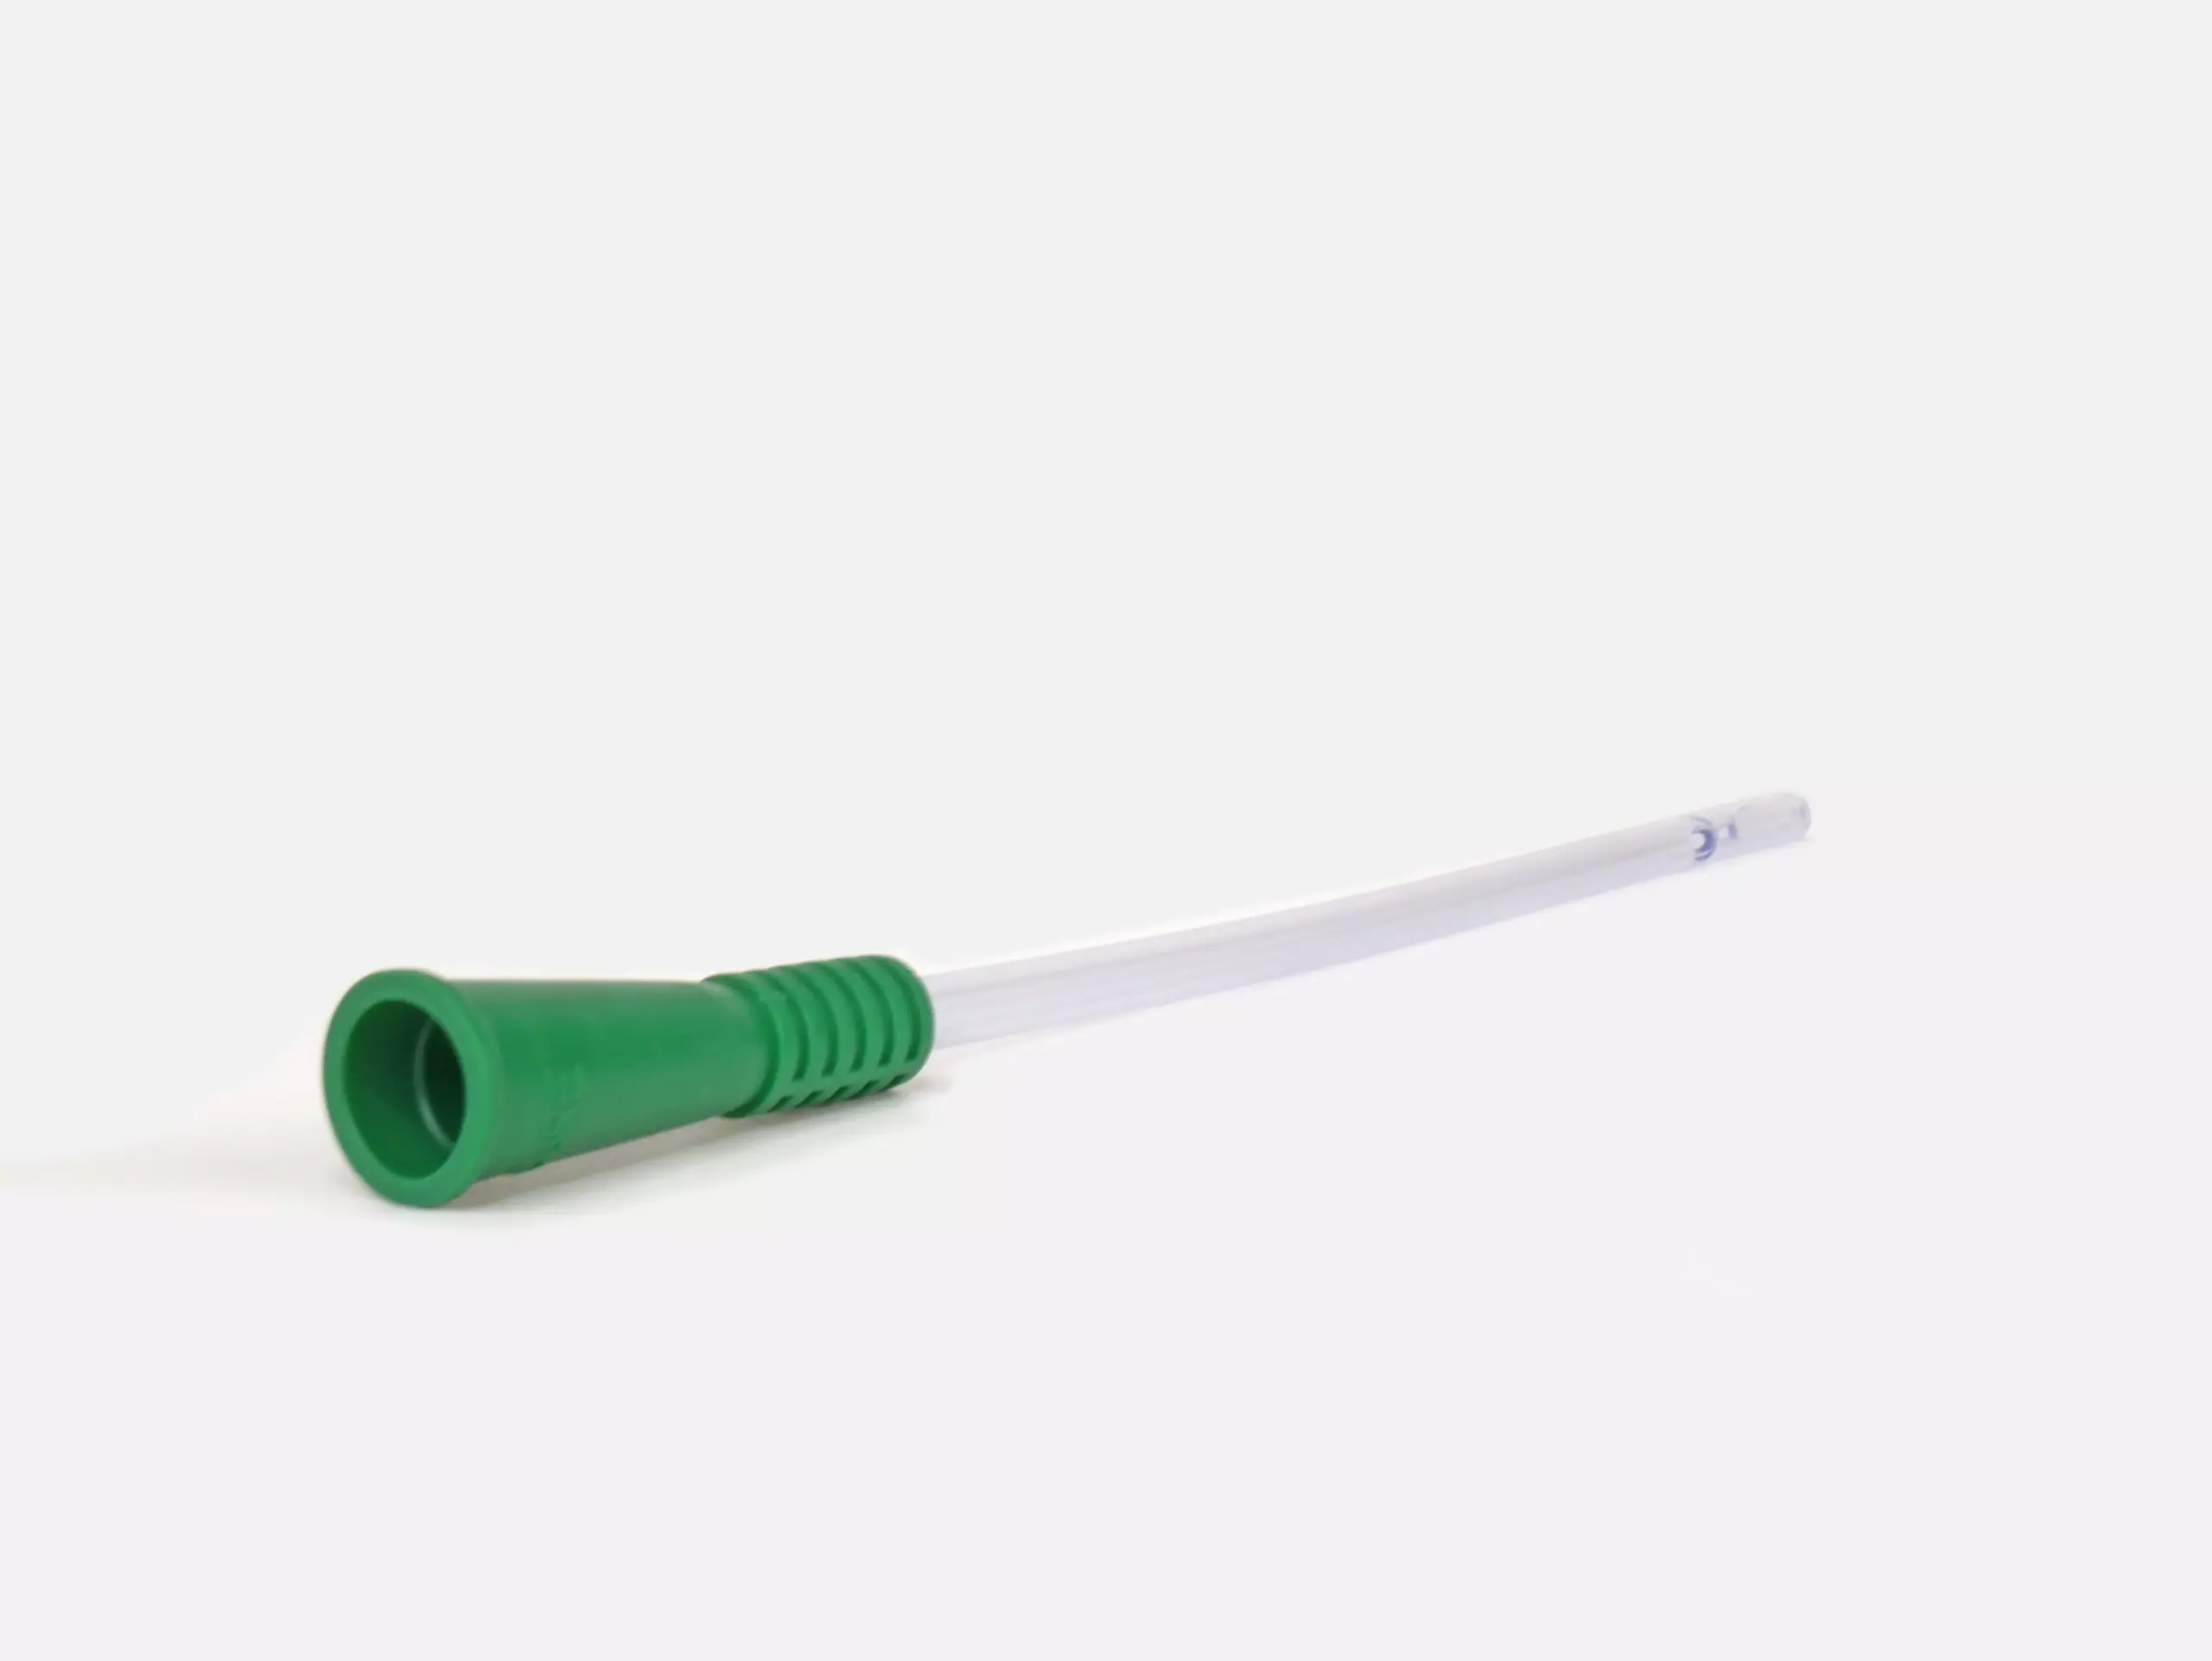 A visual displaying a Cure brand catheter from RA Fischer Co. with a distinctive green grip, positioned against a white background.